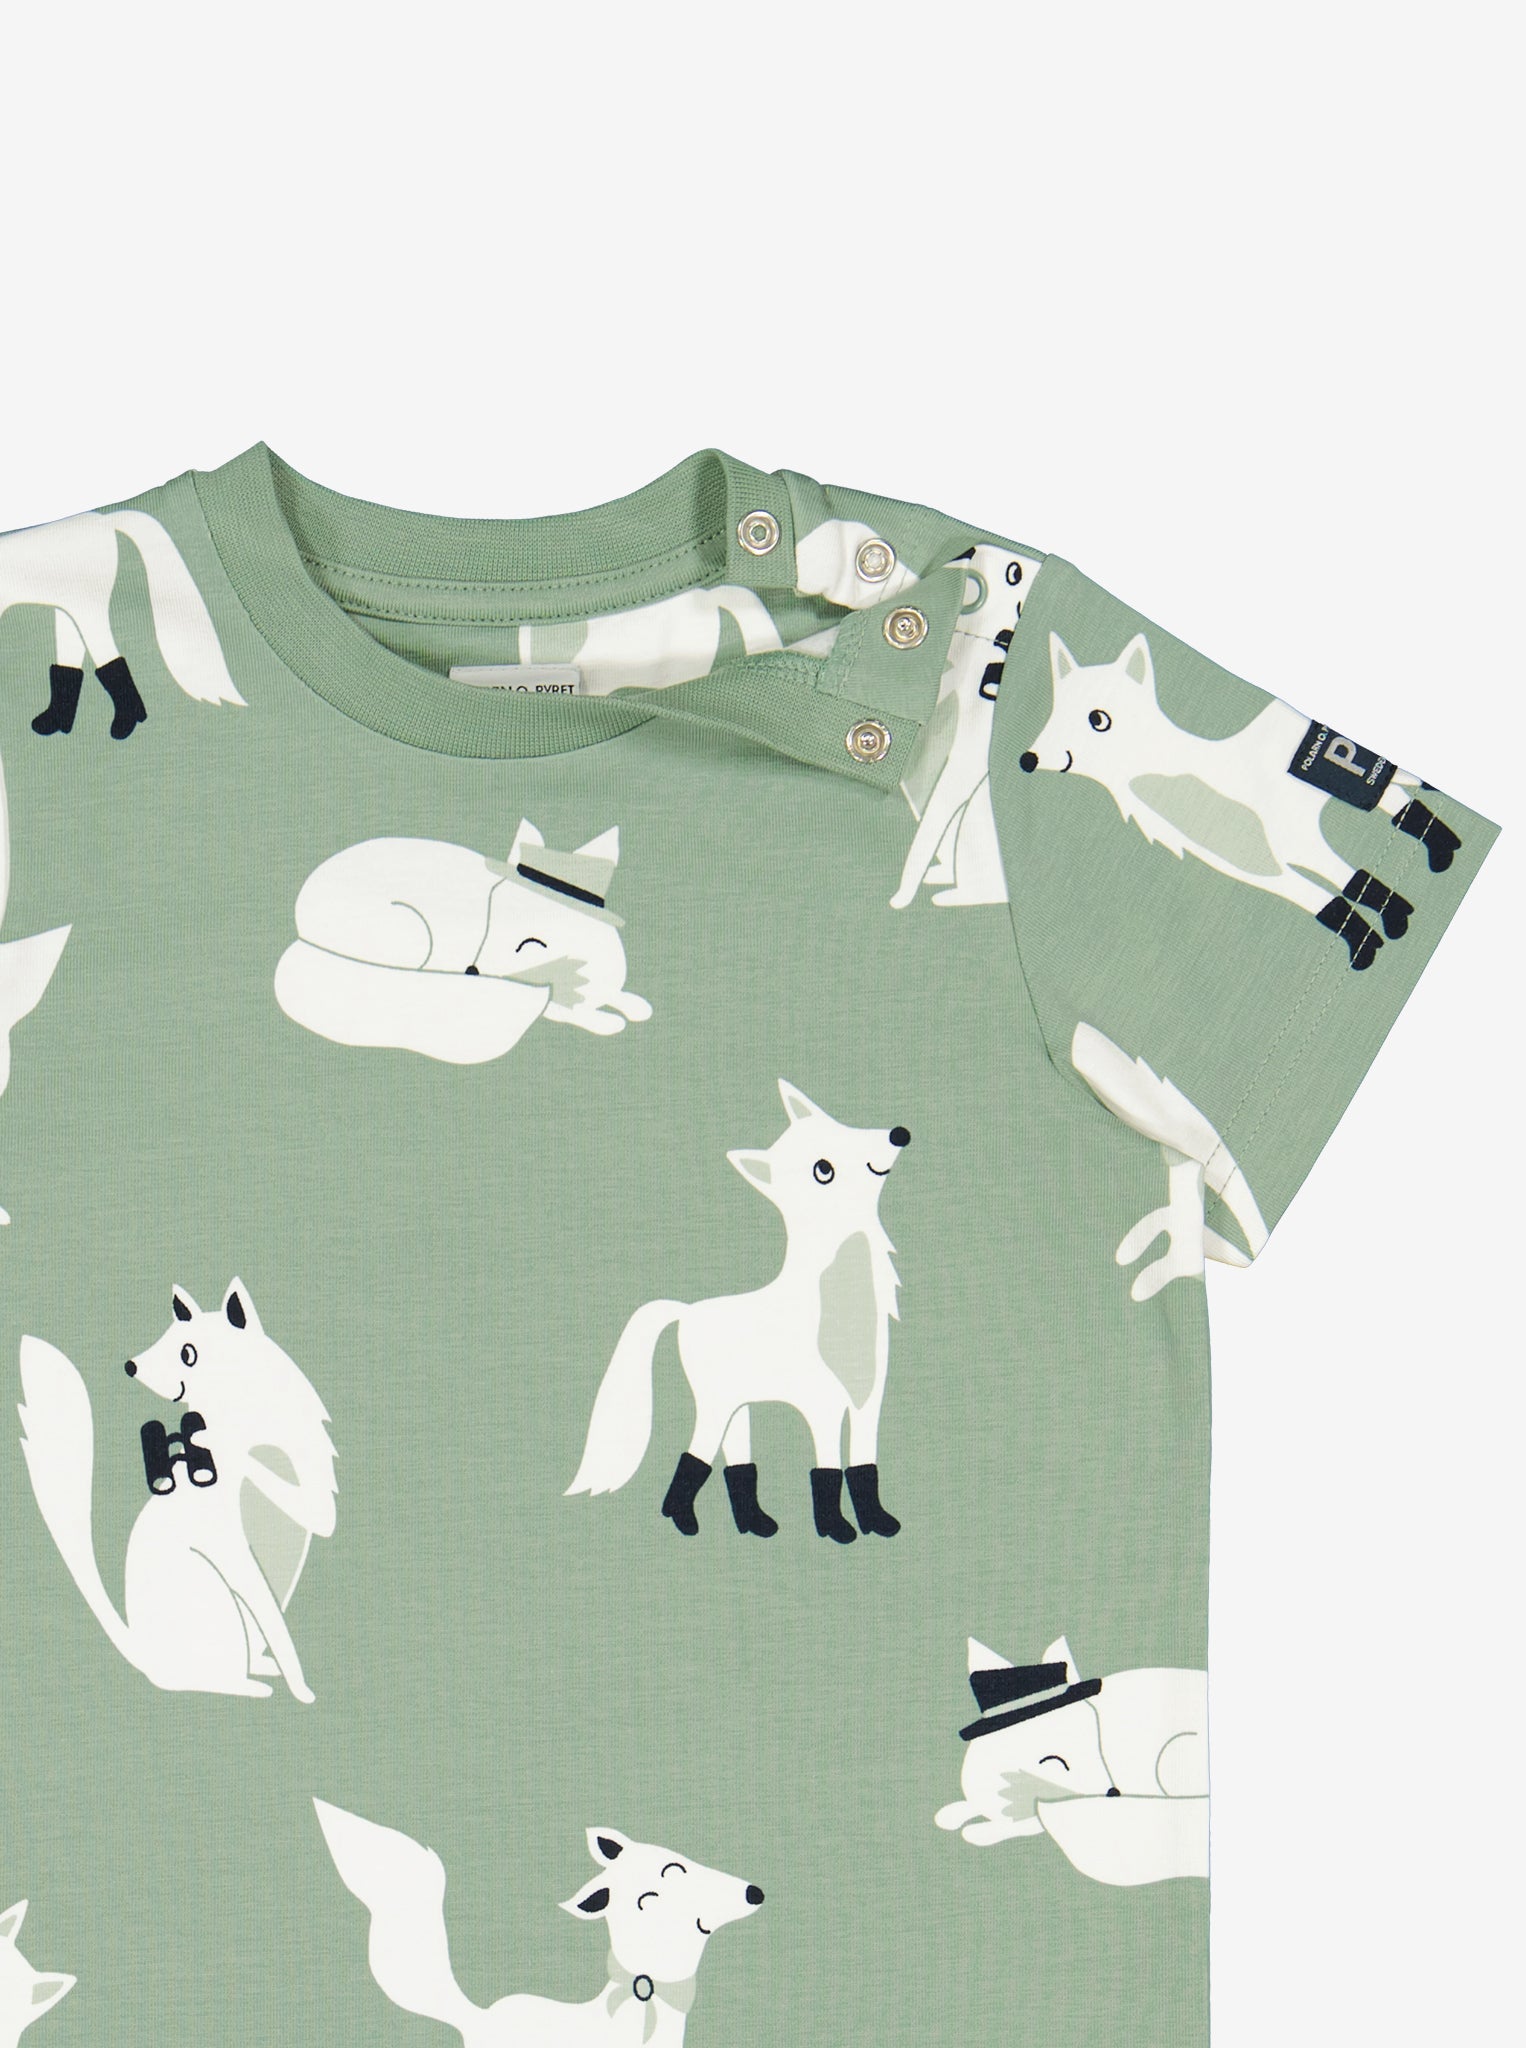  Organic Cotton Wolf Print Kids T-Shirt from Polarn O. Pyret Kidswear. Made using ethically sourced materials.